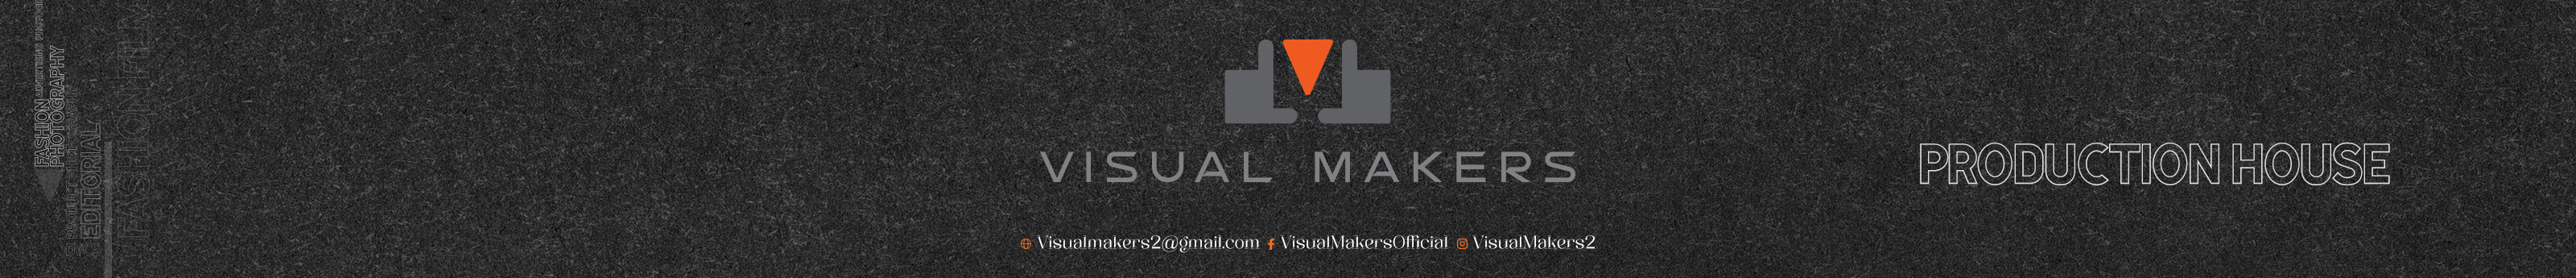 Visual Makers's profile banner